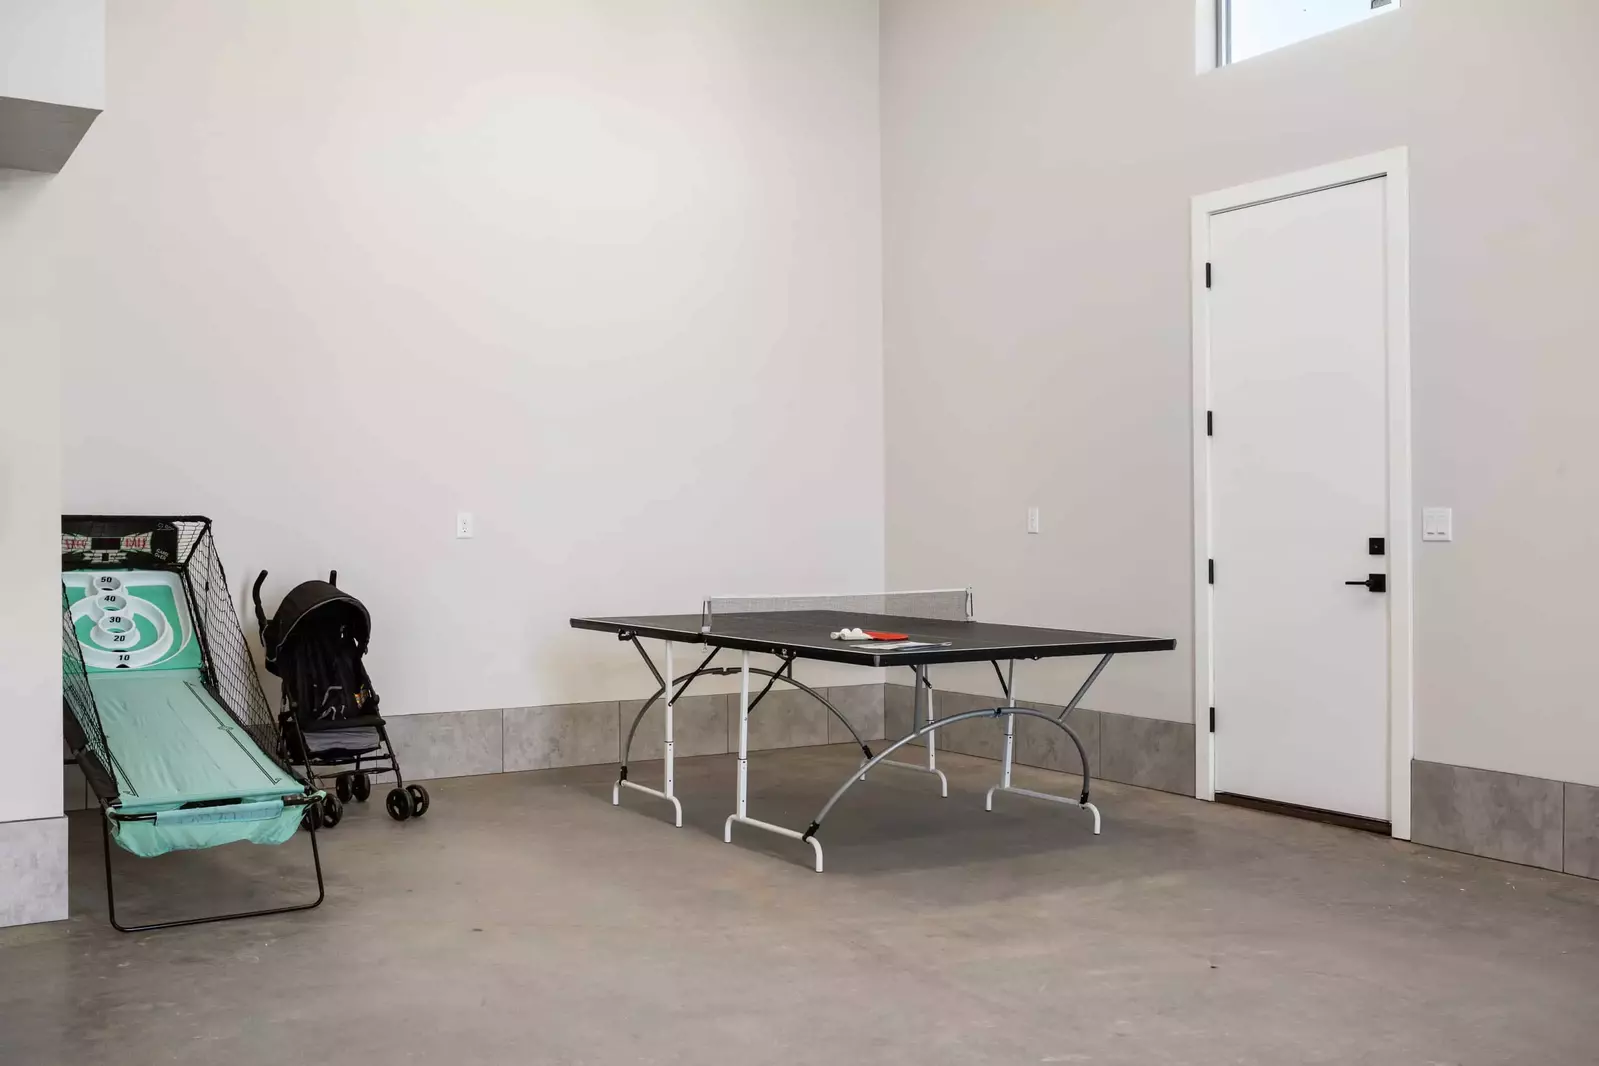 Ping Pong Table, Stroller